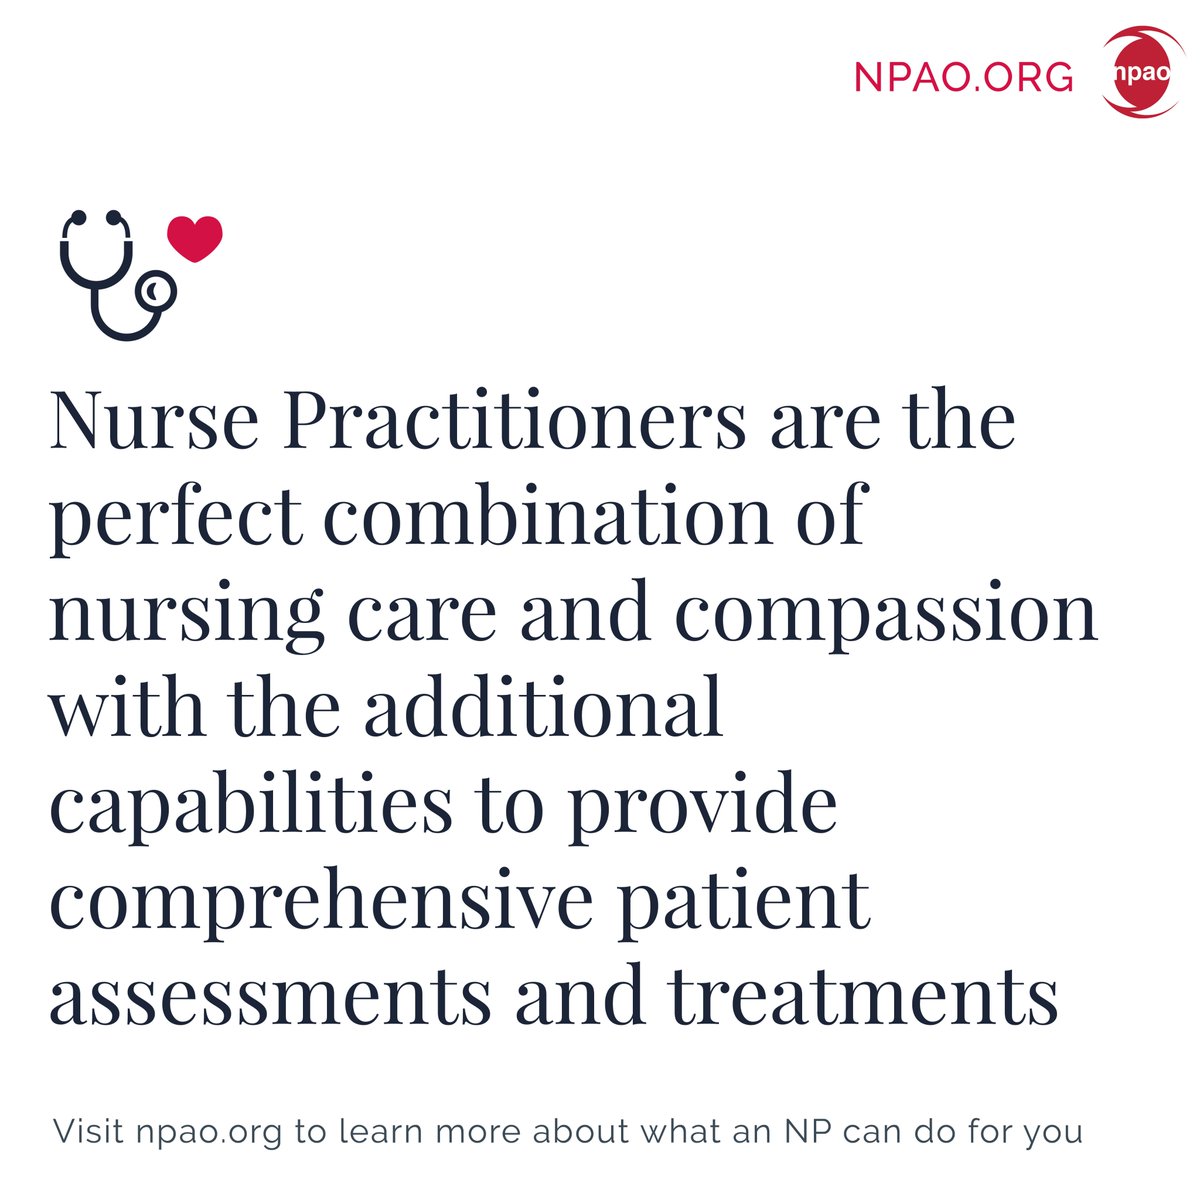 Nurse Practitioners (#NPs) are the perfect combination of #nursing care and compassion with the additional capabilities to provide comprehensive patient assessments and treatments Visit npao.org to learn more about Nurse Practitioners #NPeducation #NPAO